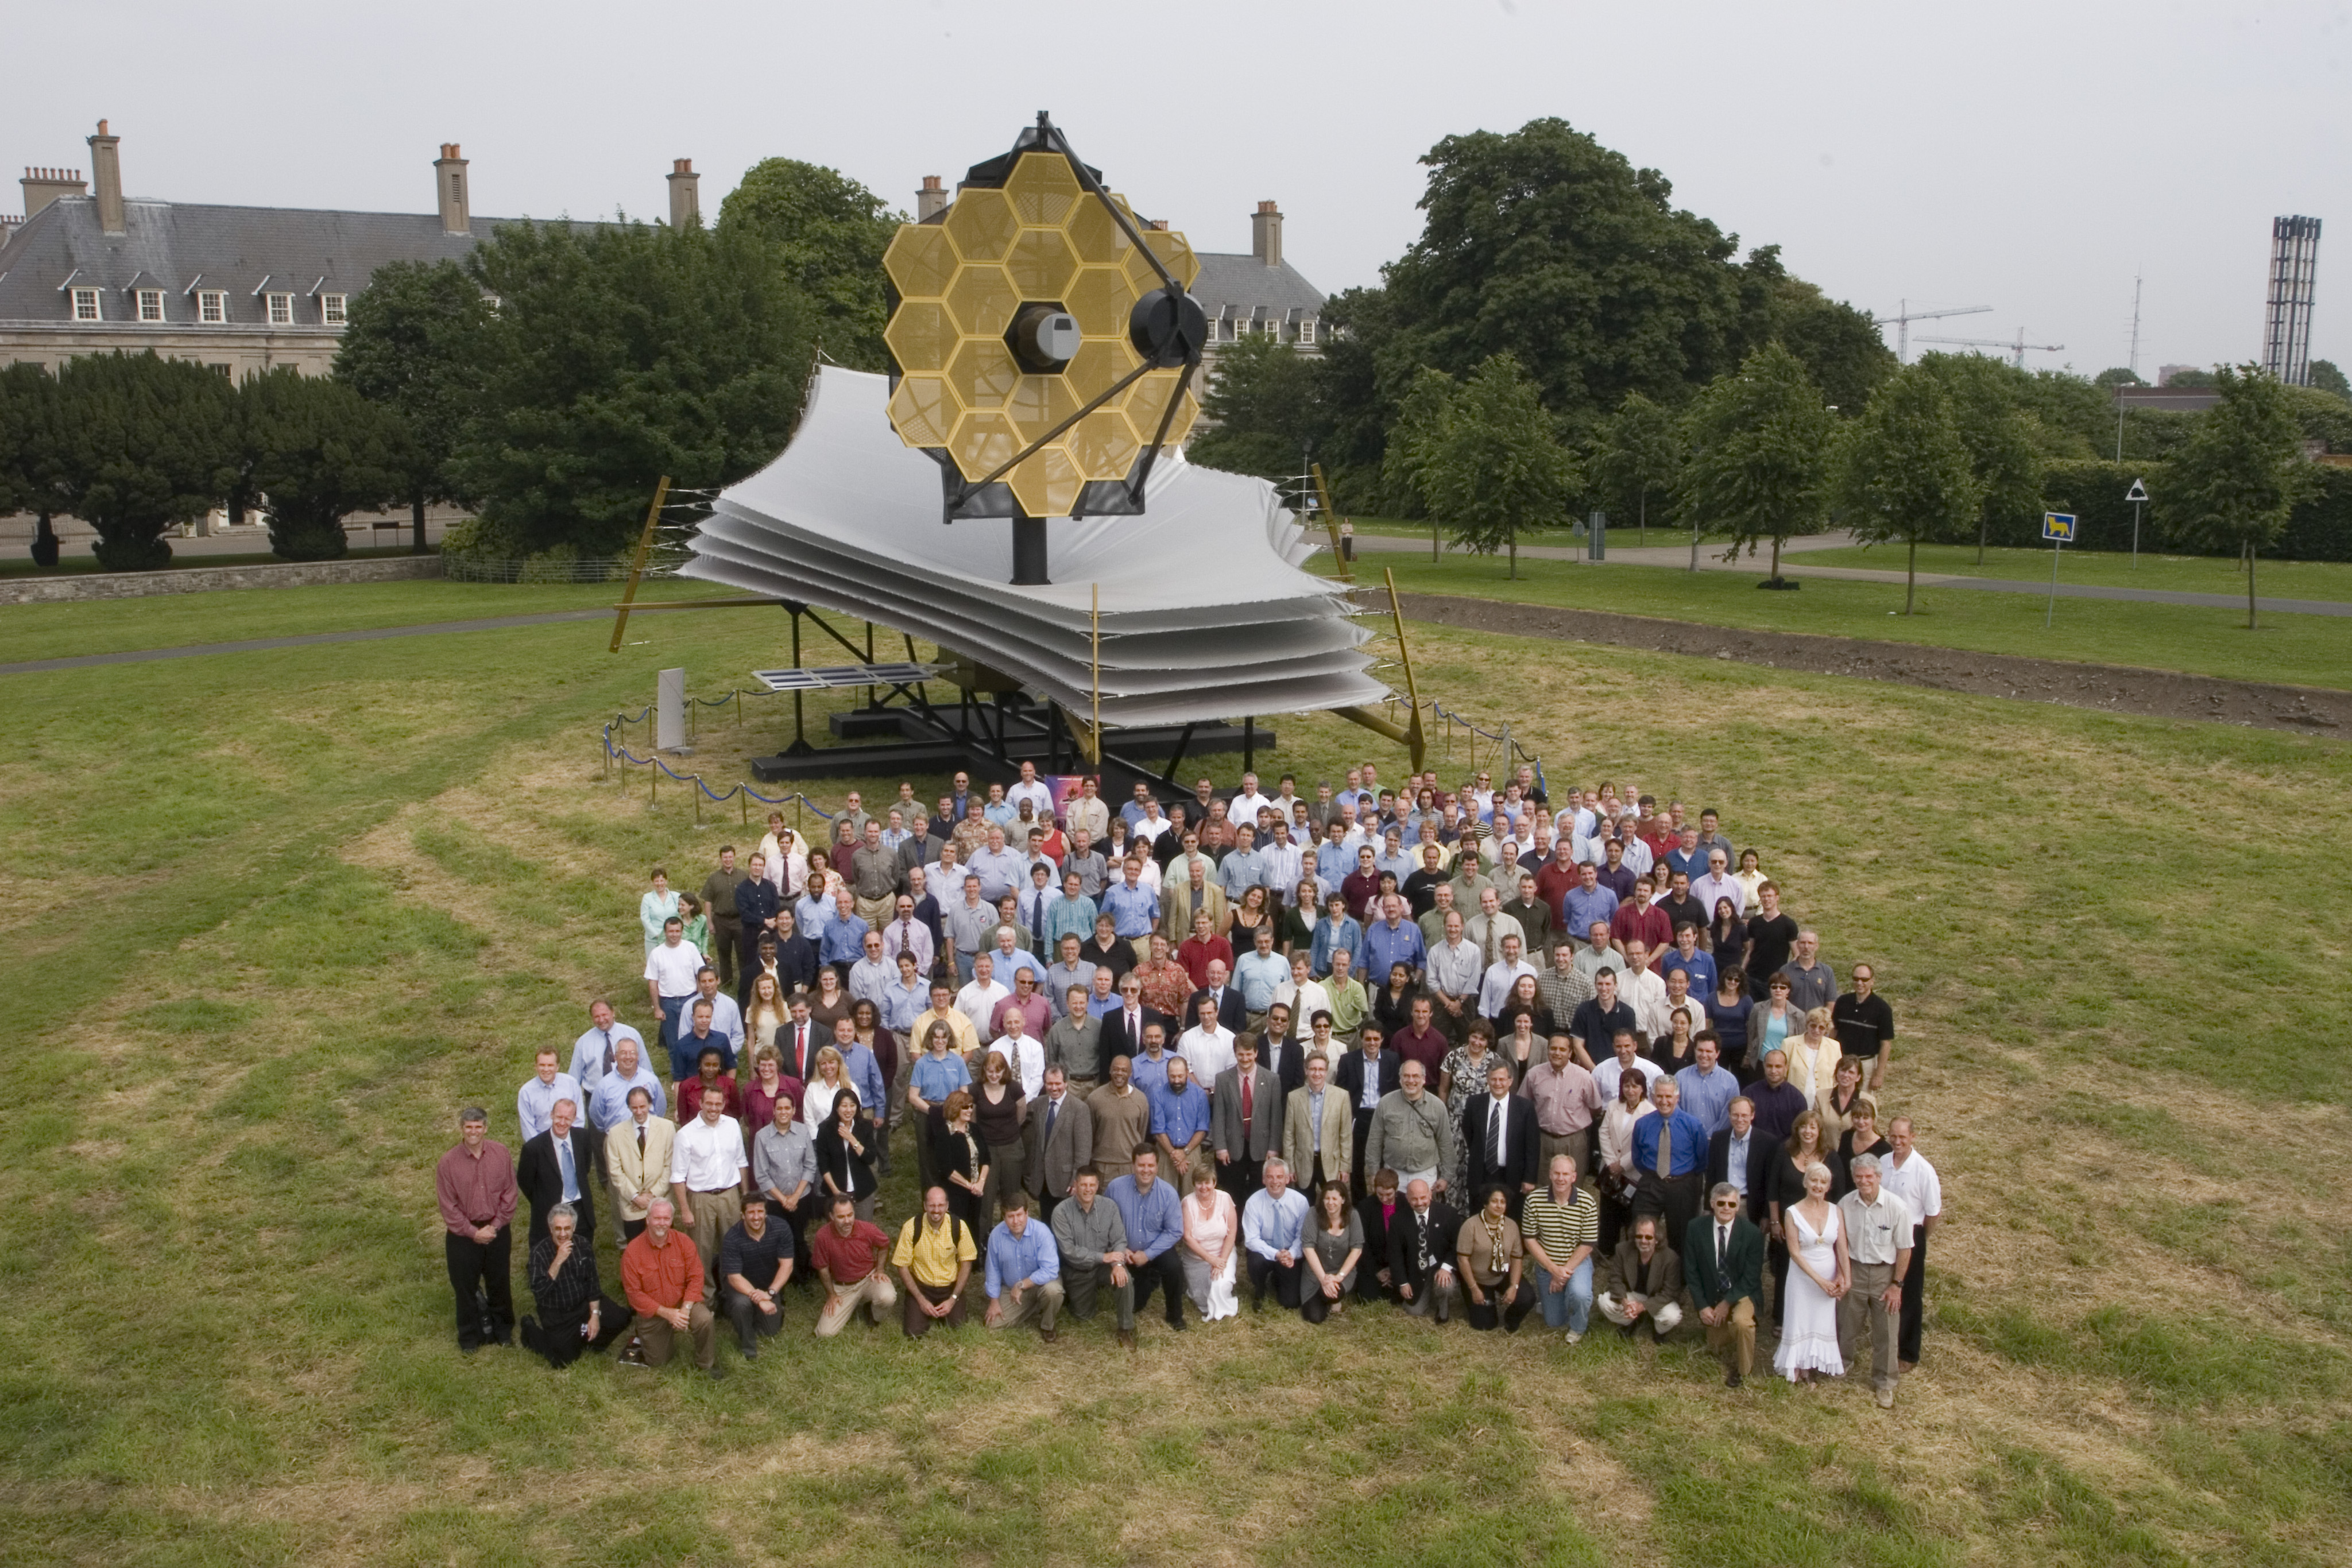 JWST_team_in_front_of_real-size_scale_model.jpg